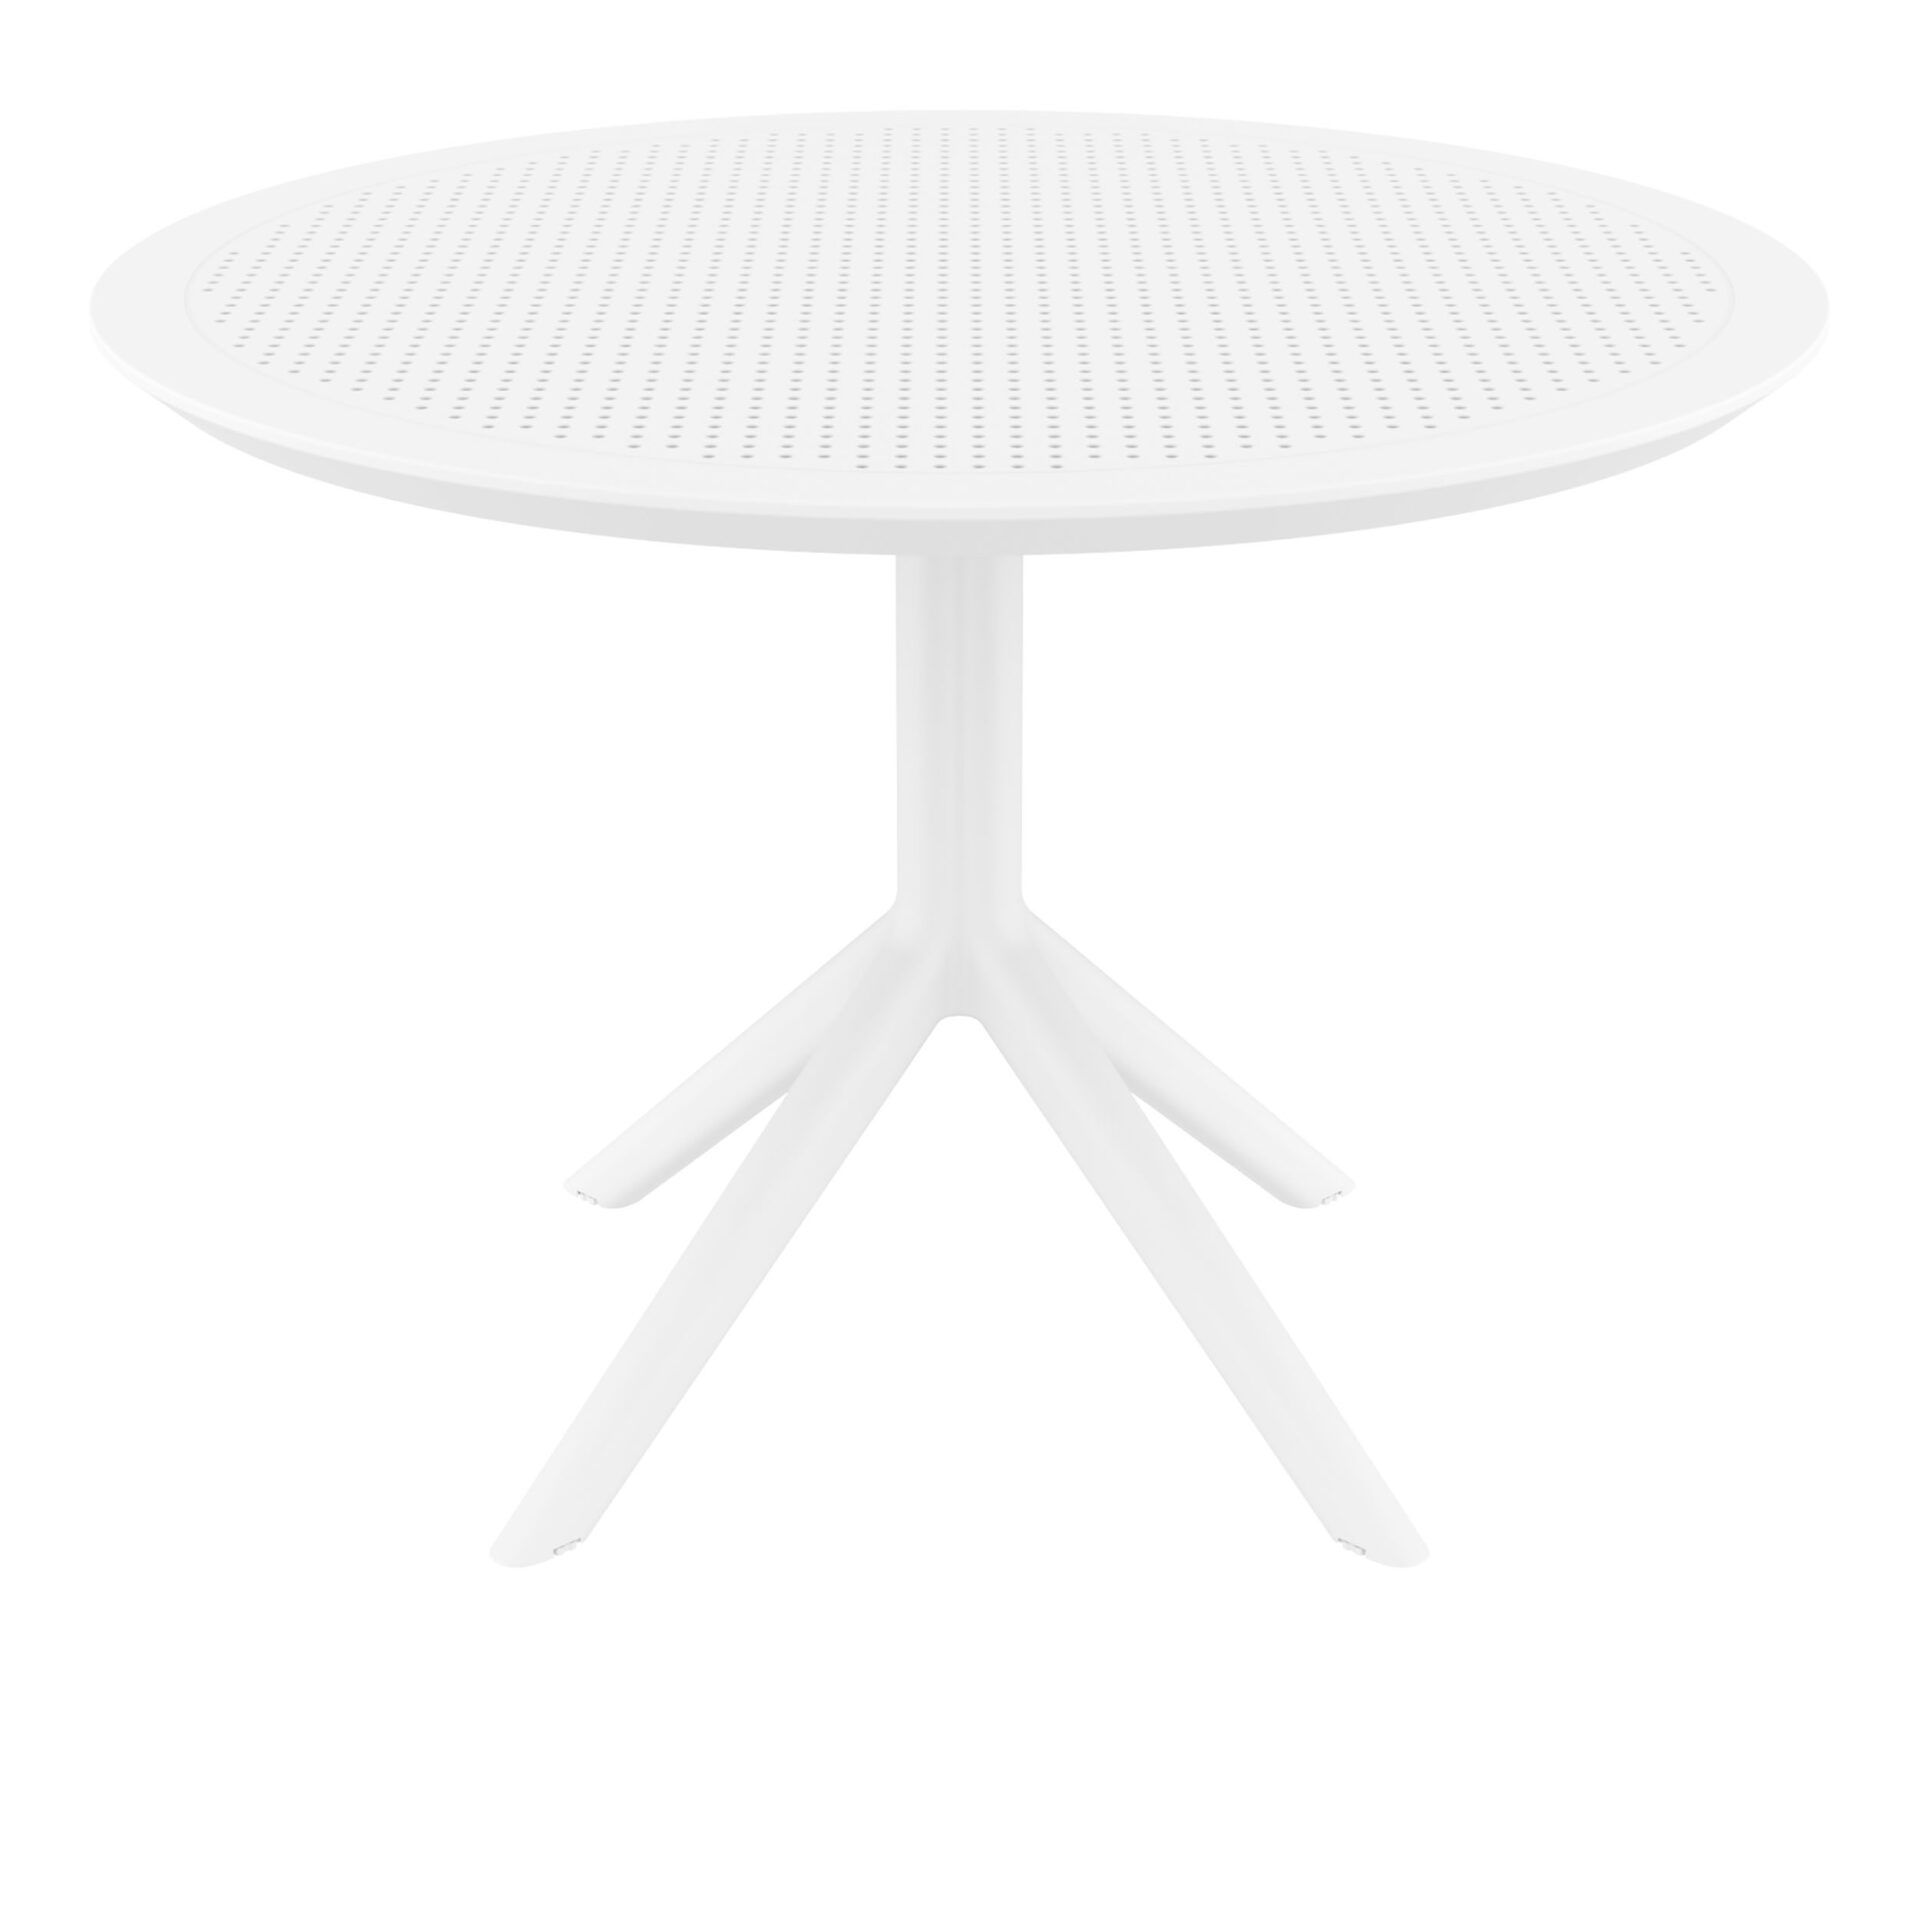 010 sky table 105 white front